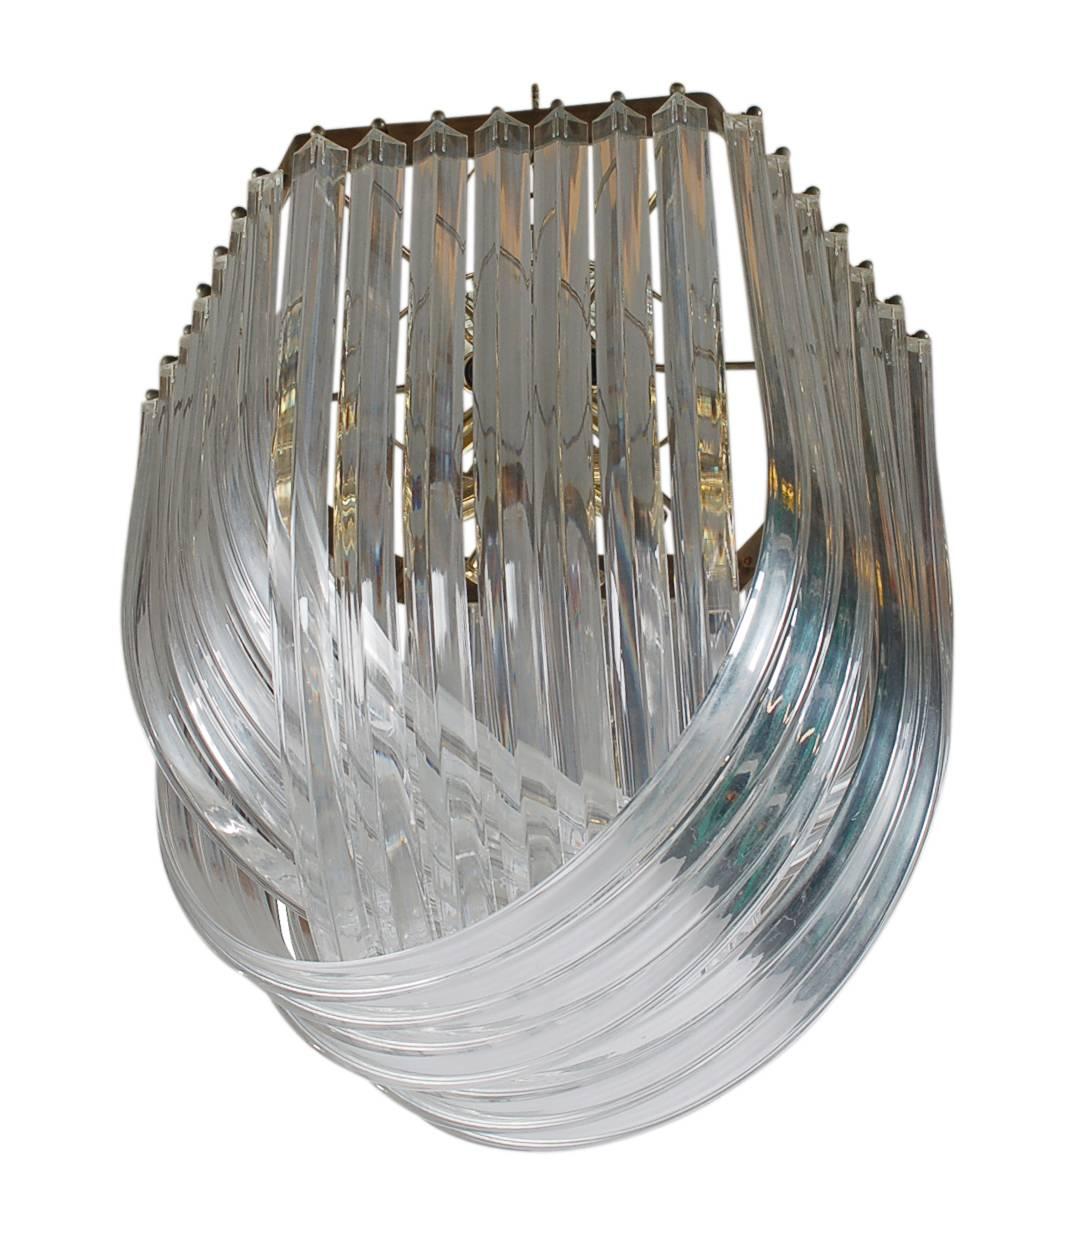 A strikingly beautiful Hollywood Glam chandelier. It features brass framing with several curved Lucite strands.